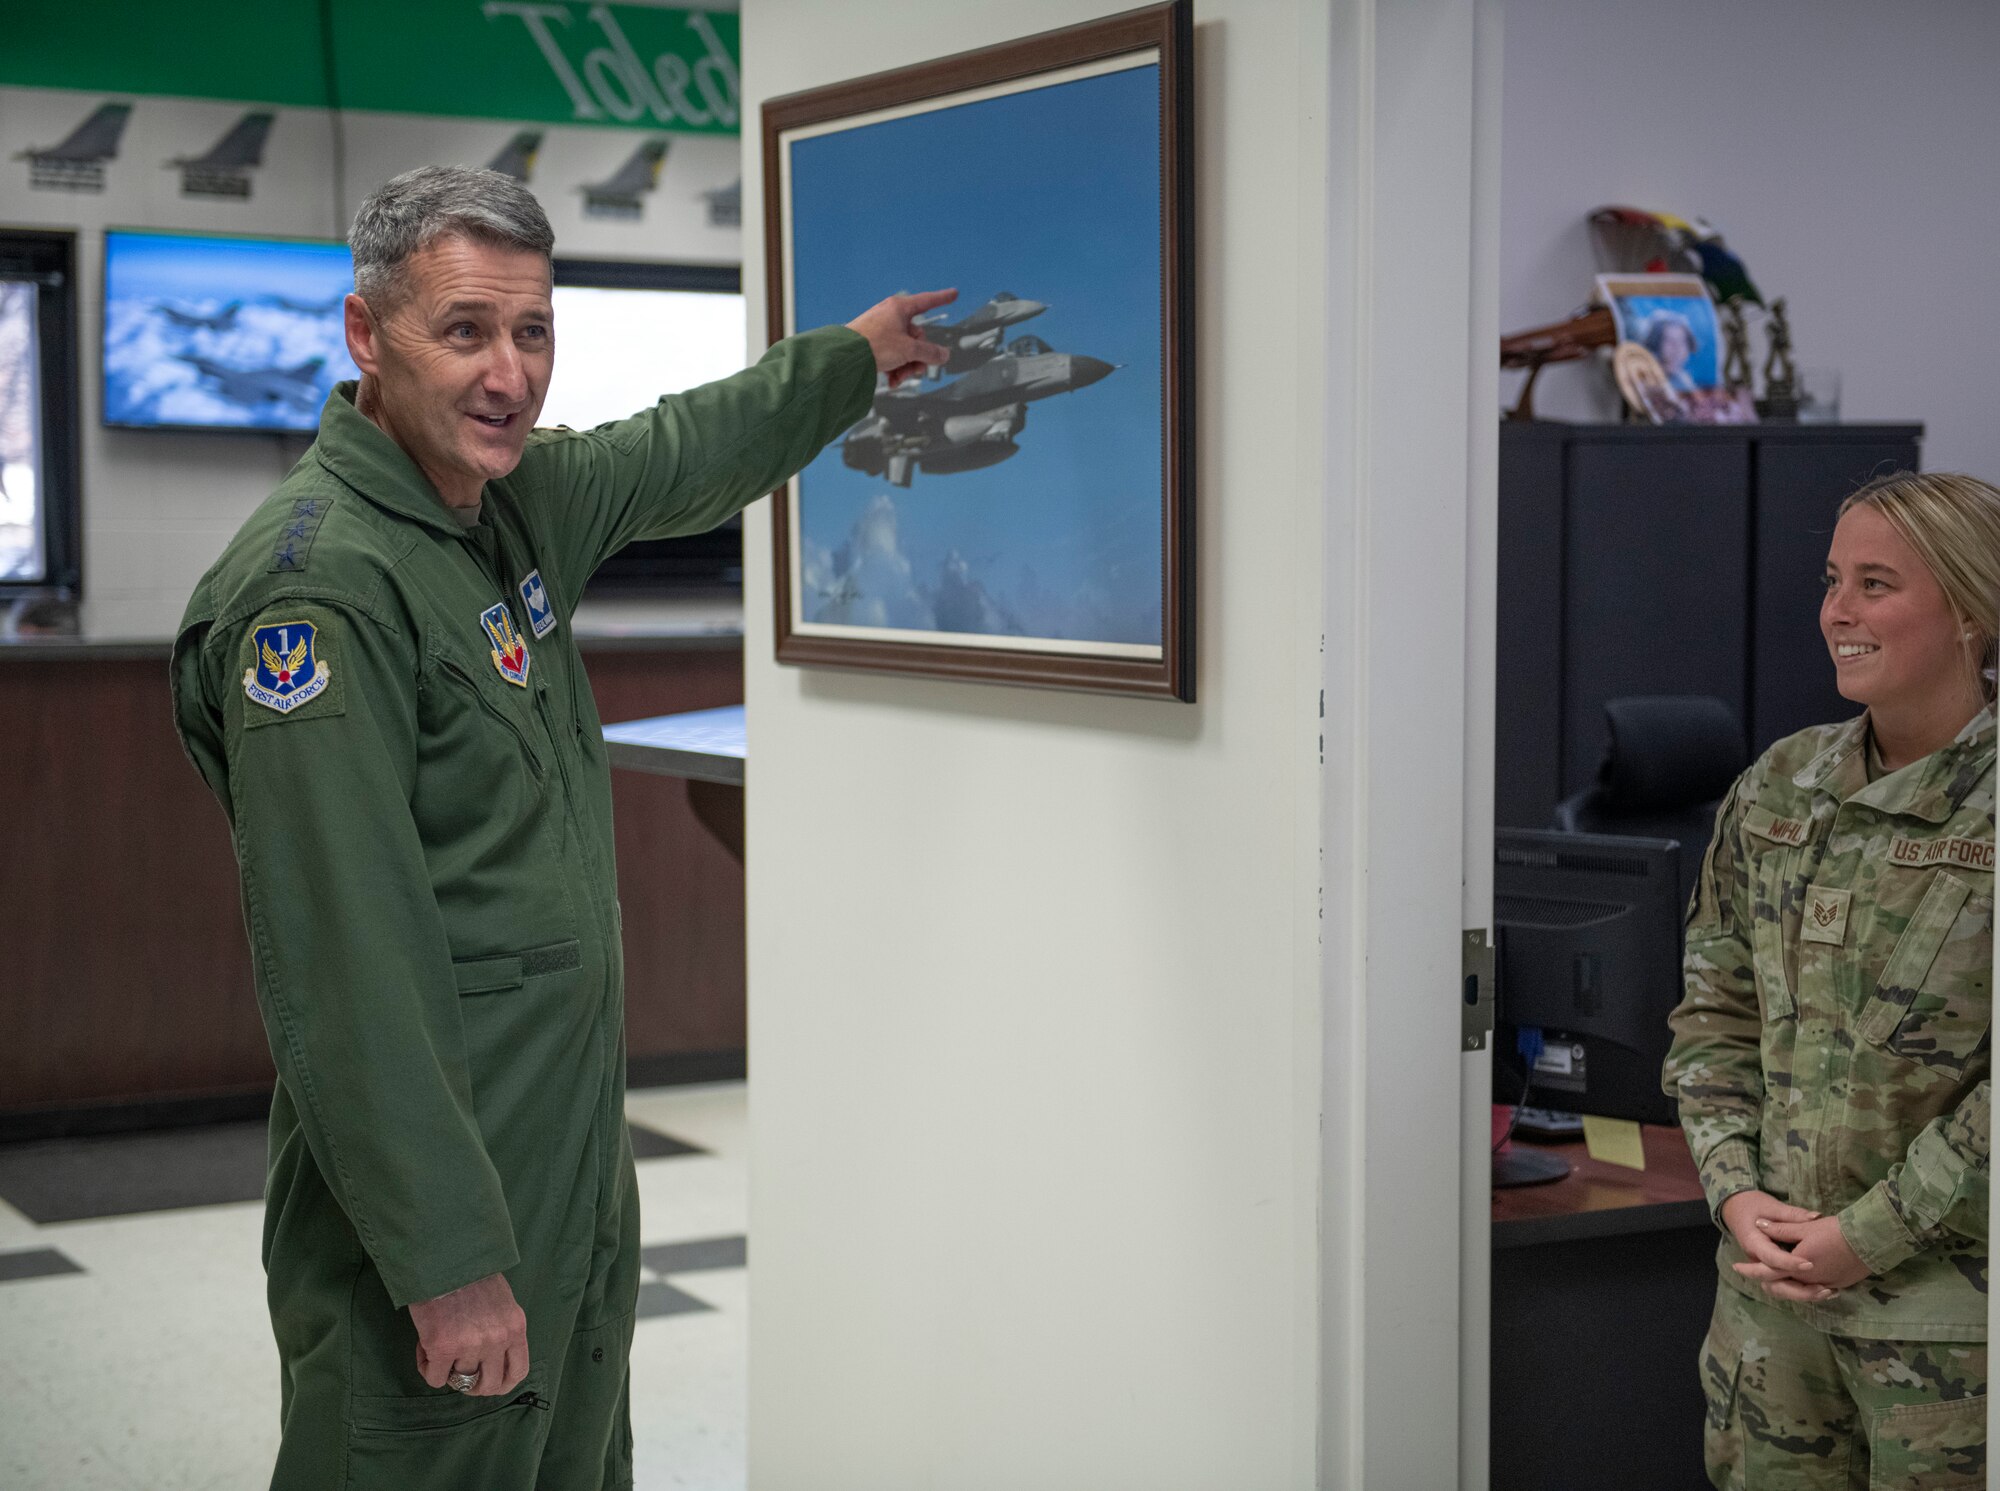 U.S. Air Force Lt. Gen. Steven S. Nordhaus, 1st Air Force commander, converses with U.S. Air Force Staff Sgt. Jordan Mohler, an aviation resource manager assigned to the Ohio National Guard’s 180th Fighter Wing, in Swanton, Ohio, Feb. 1, 2024. Nordhaus, who commanded the 180FW from 2011 to 2013, received a tour of the wing's facilities and discussed the 180FW’s Aerospace Control Alert mission during his visit. (U.S. Air National Guard photo by Airman 1st Class Nicholas Battani)